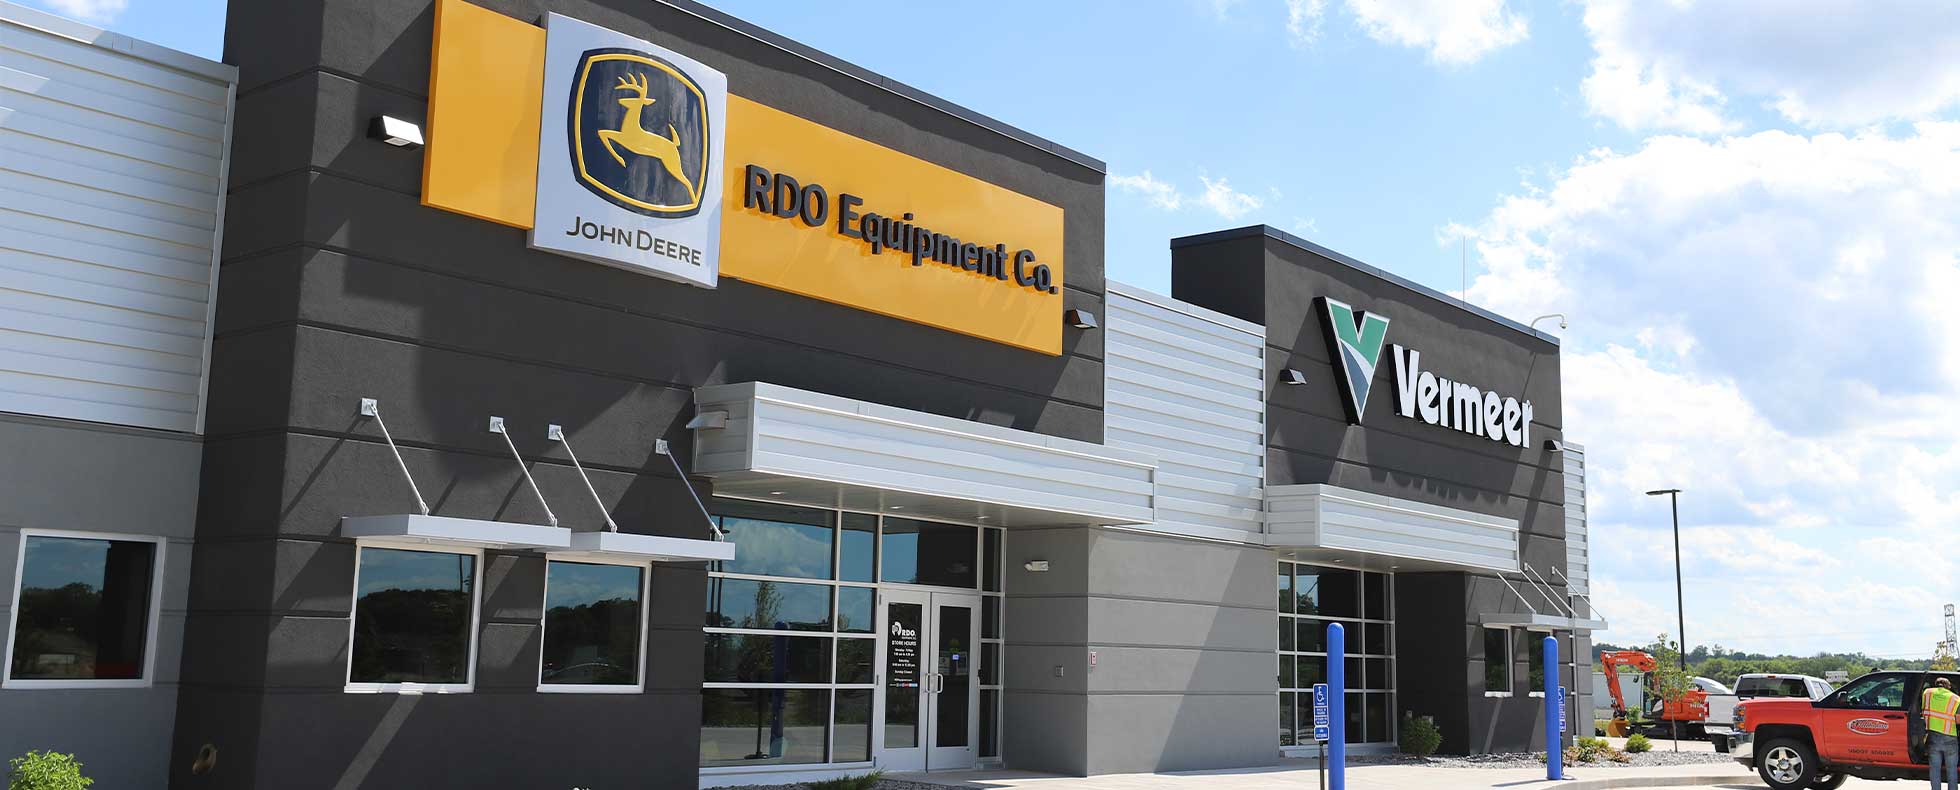 Store Tour and Full Equipment, Service, and Support at RDO in Dayton, MN